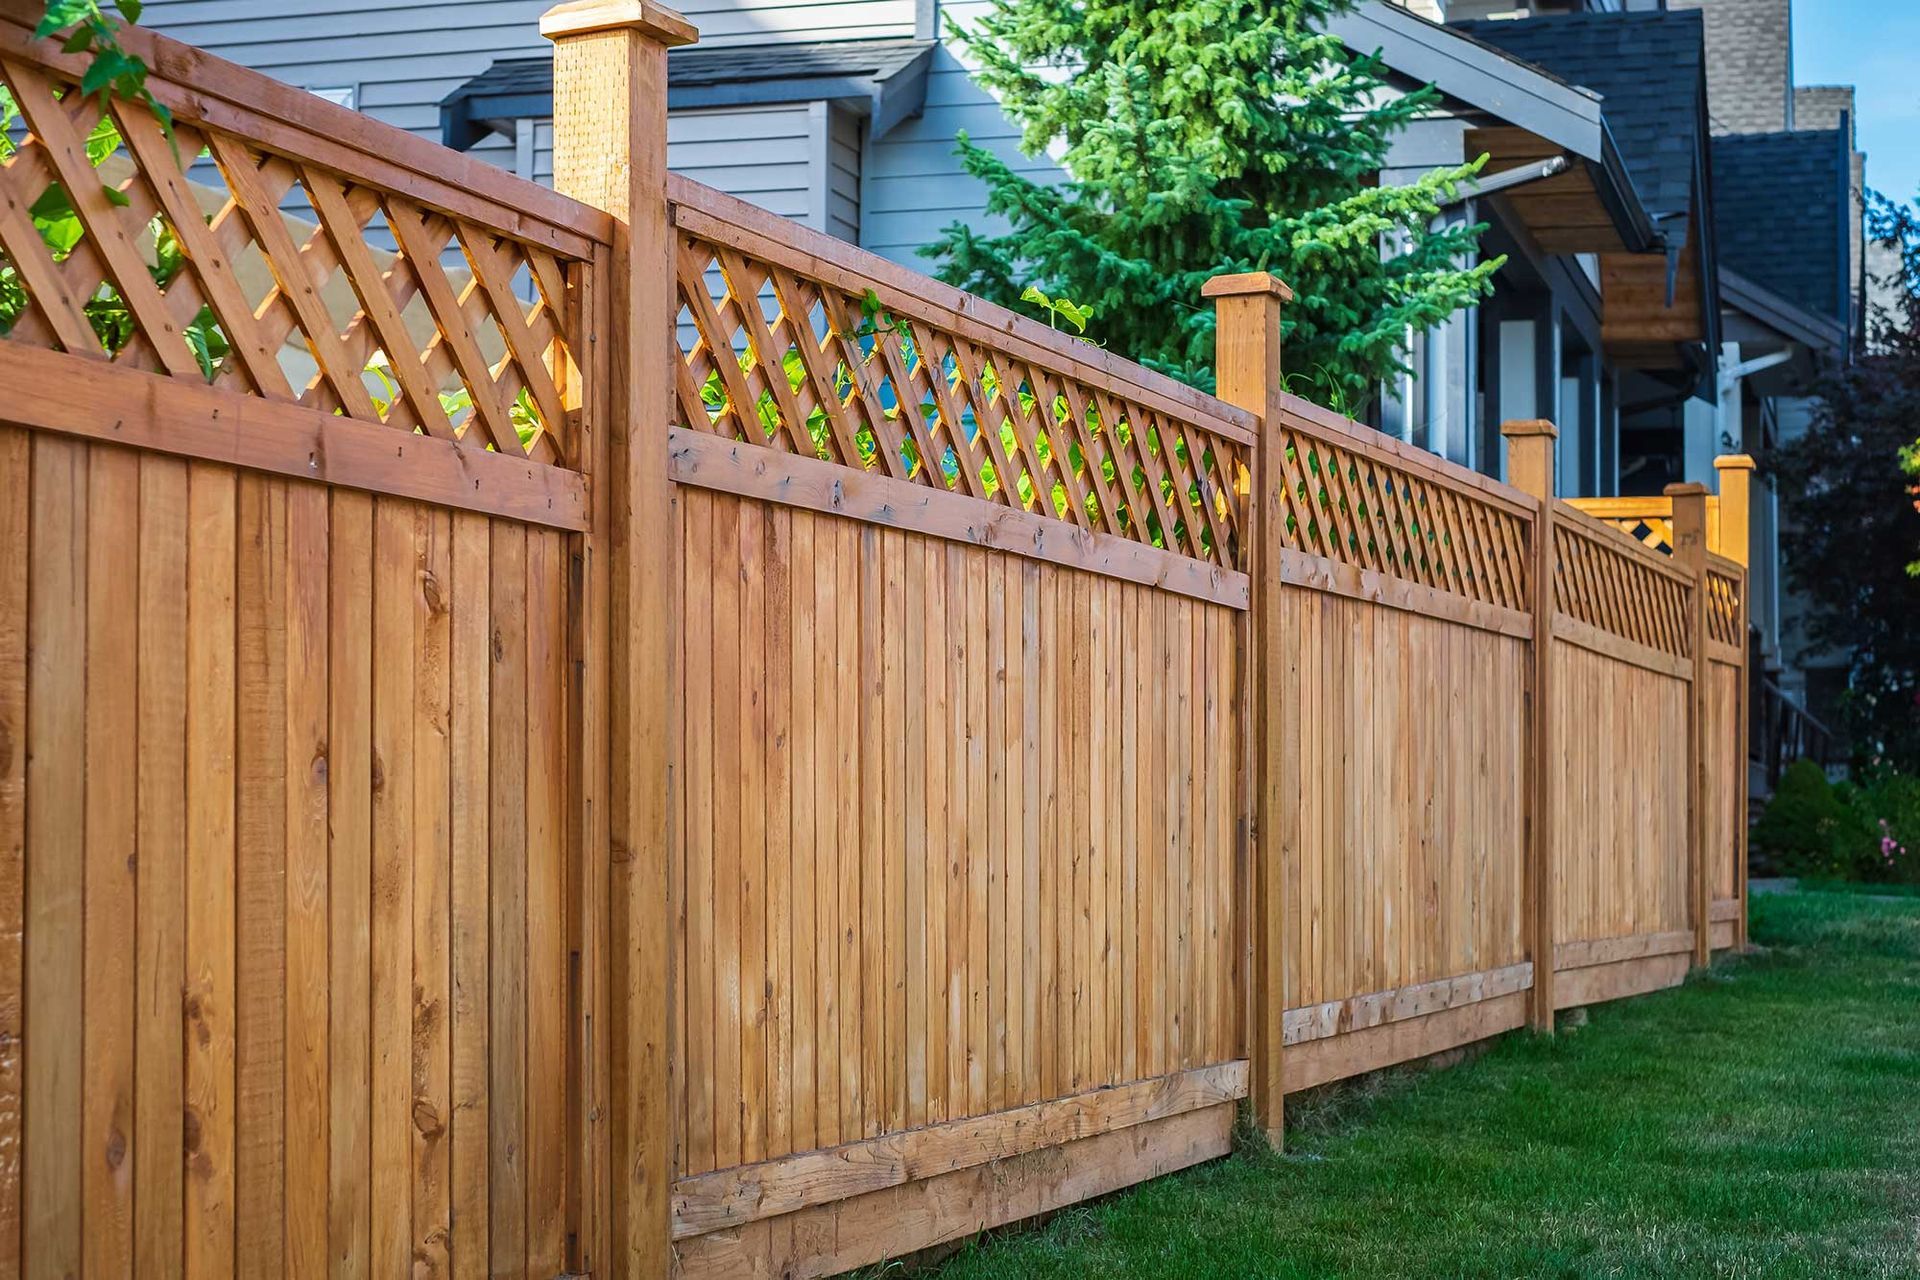 A wooden fence surrounds a lush green yard in front of a house.